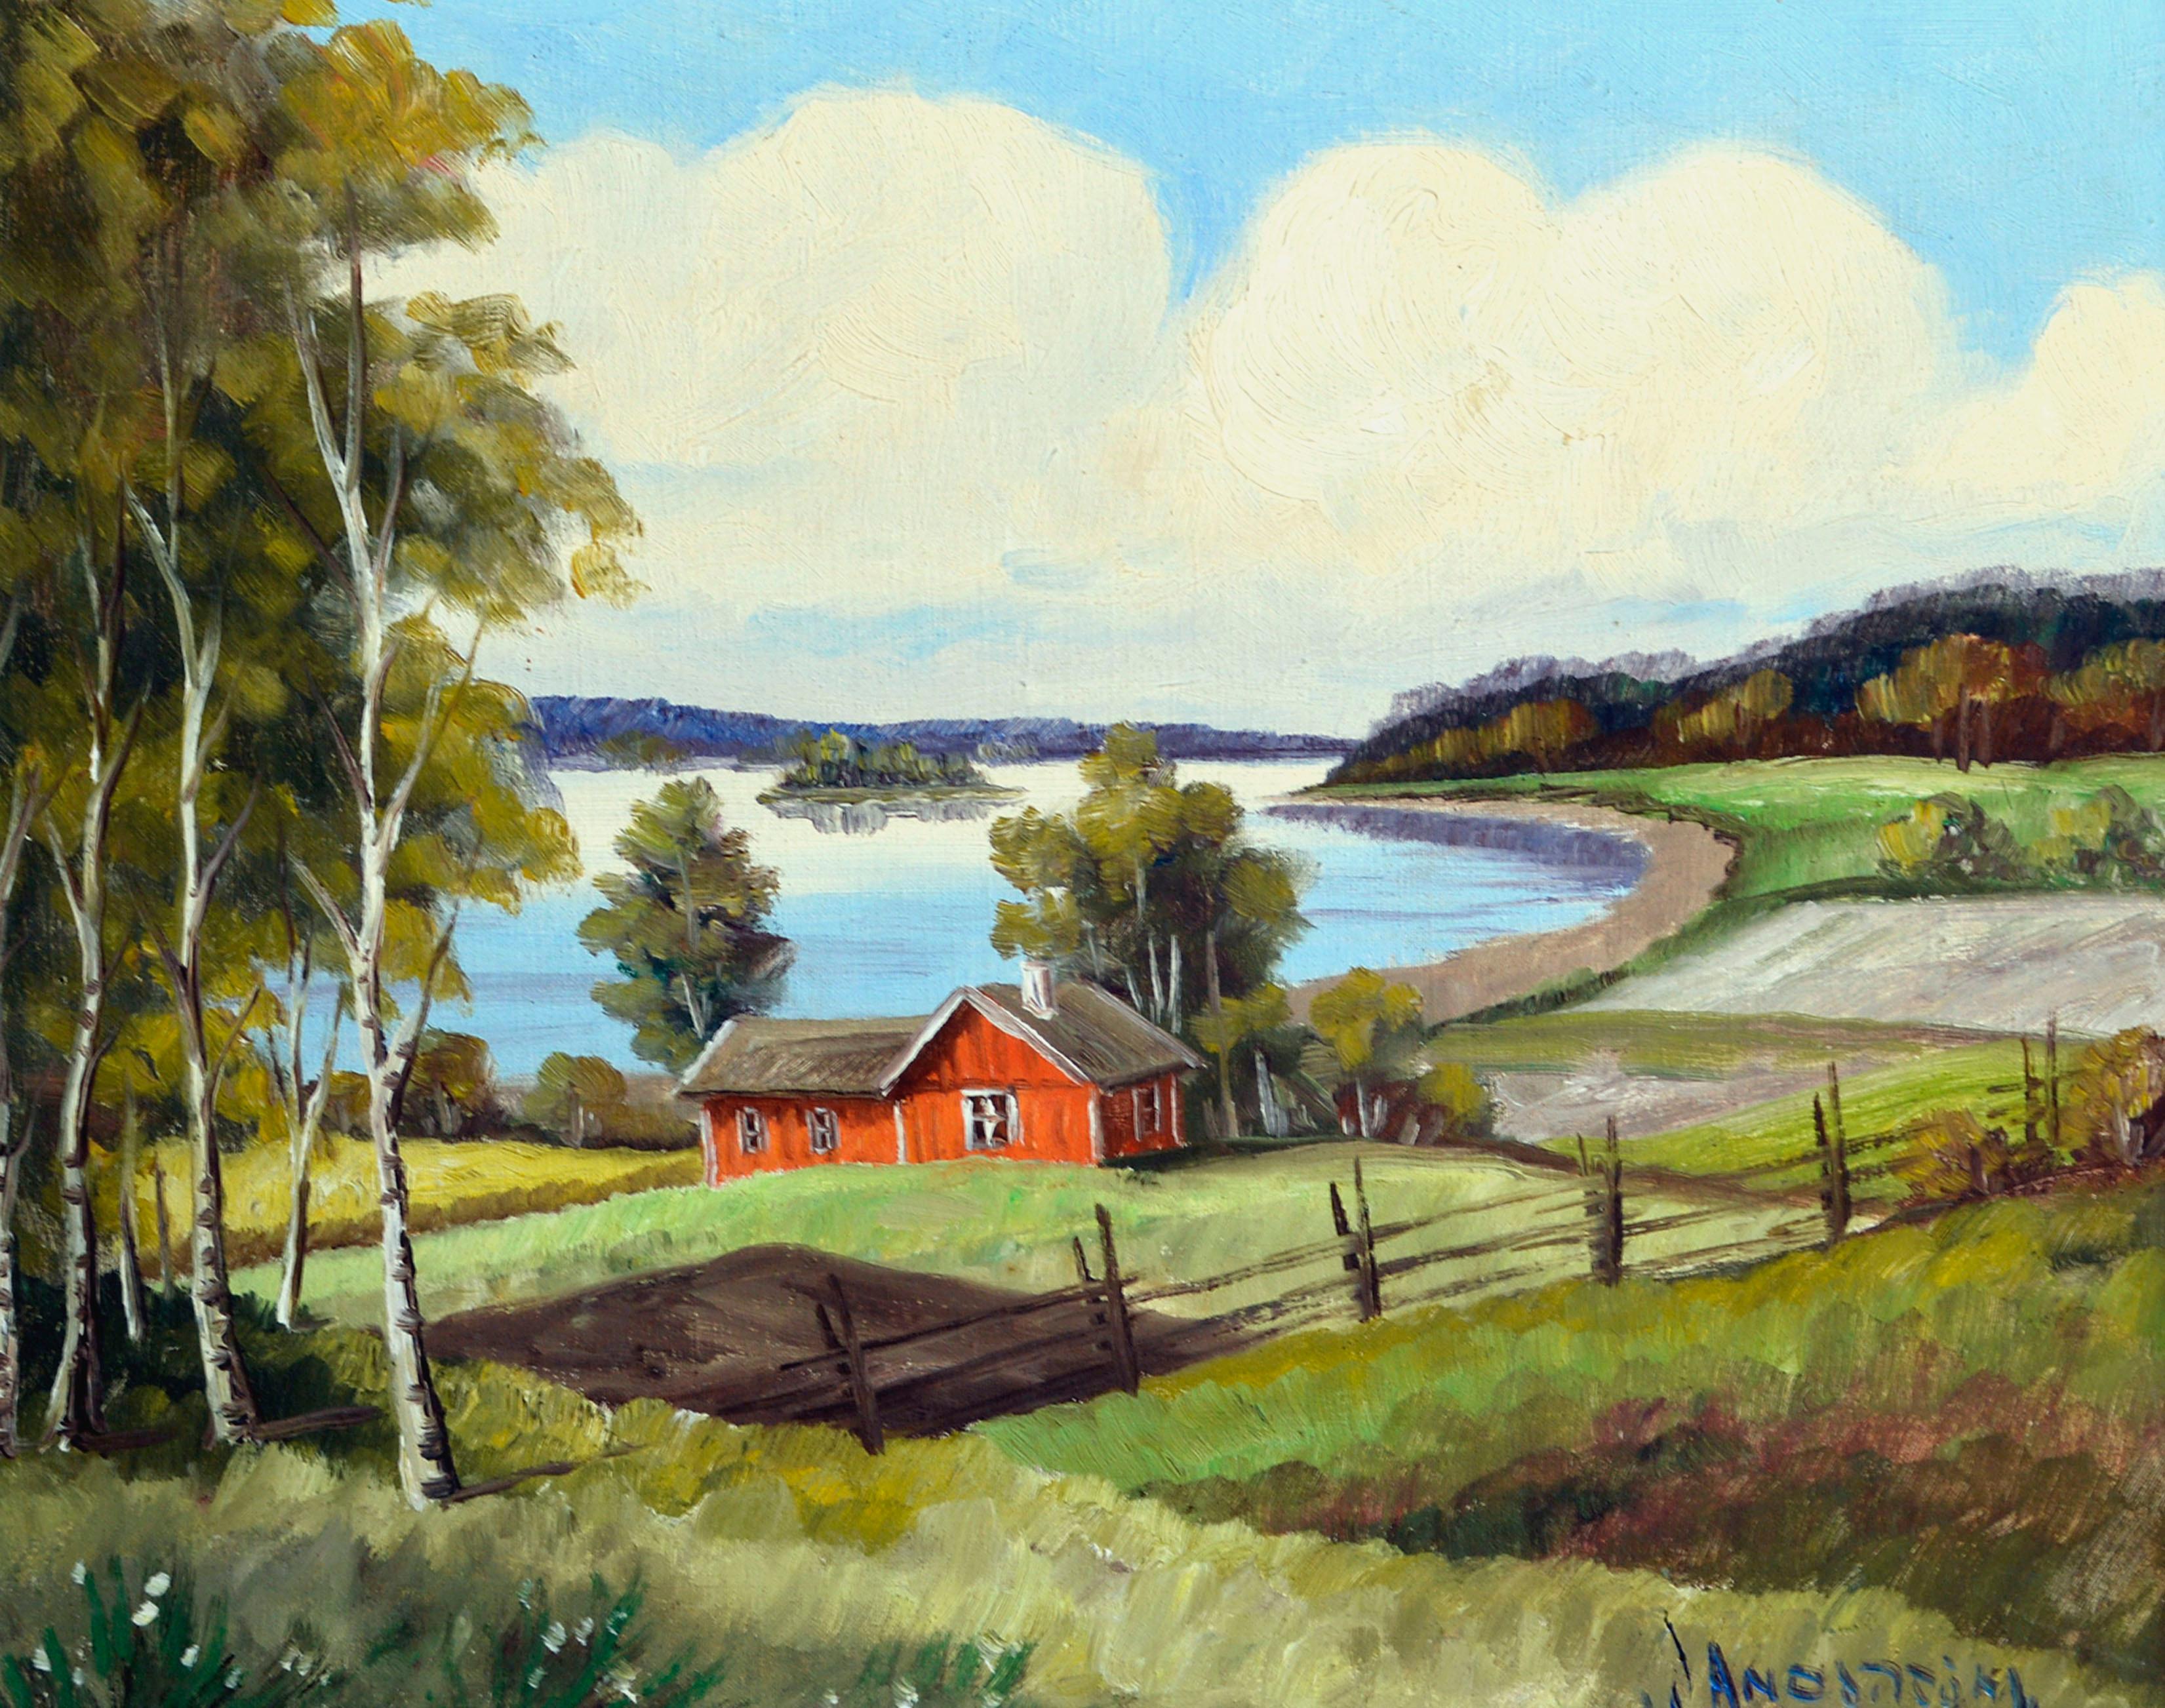 Mid Century River & Farm Landscape - Painting by J. Anderson